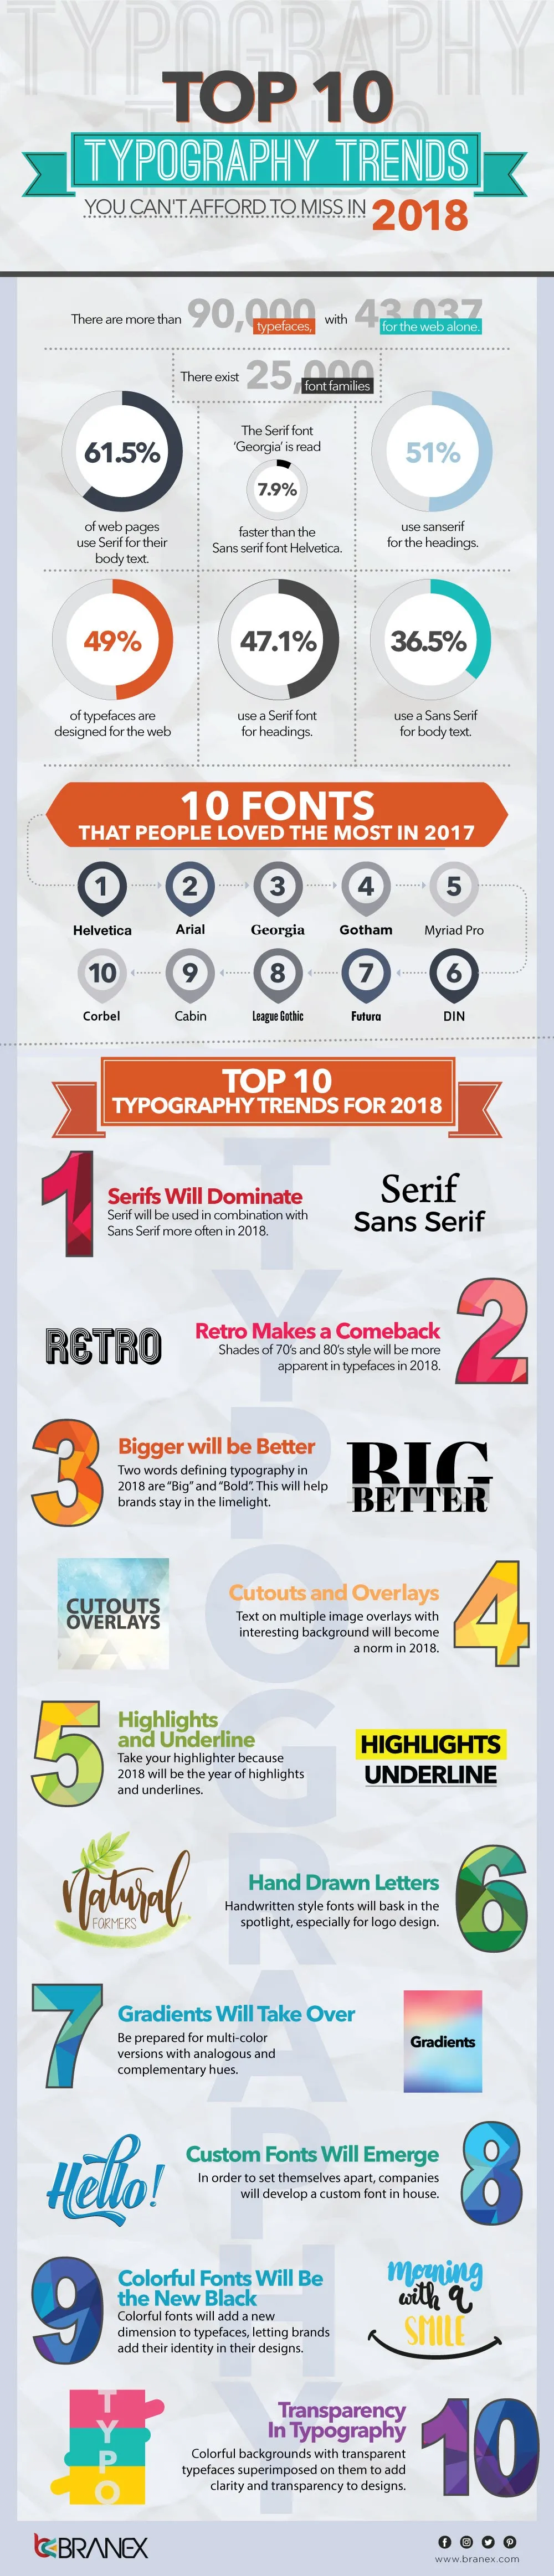 Top 10 Typography Trends For 2018 - #infographic